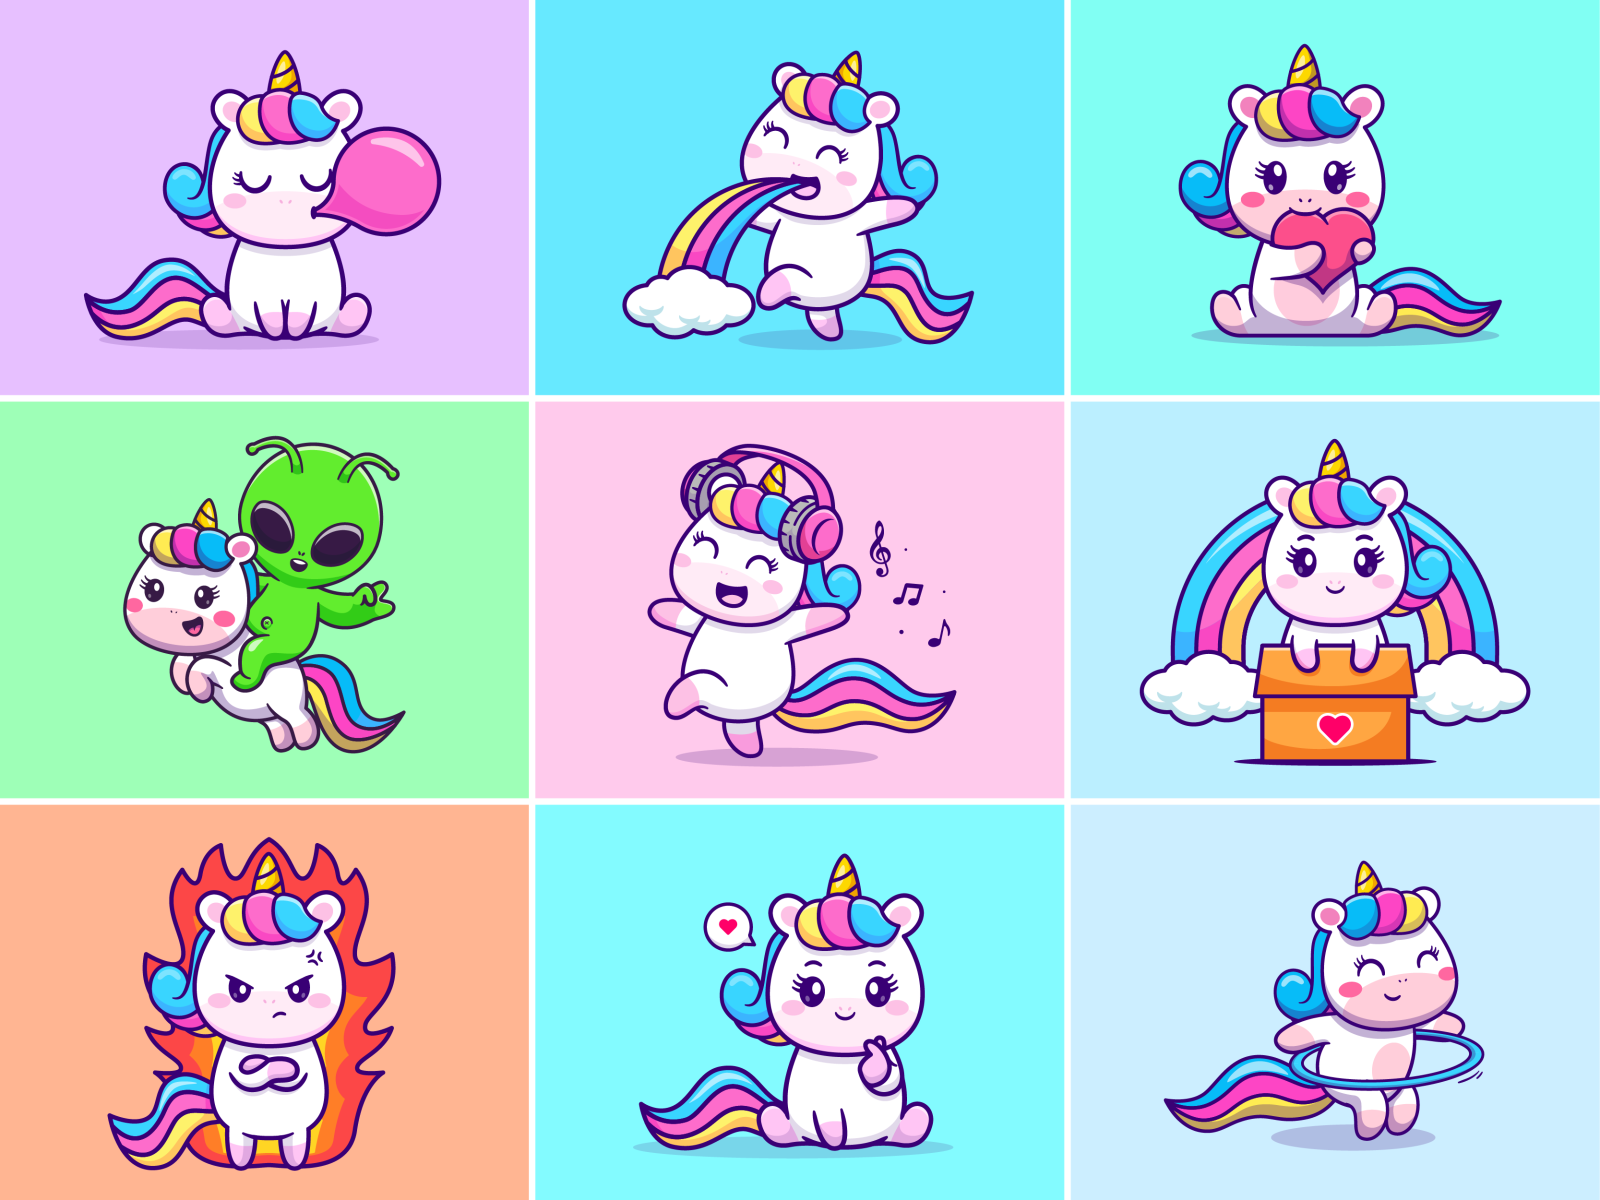 How to Draw a Cute Unicorn Girl step by step